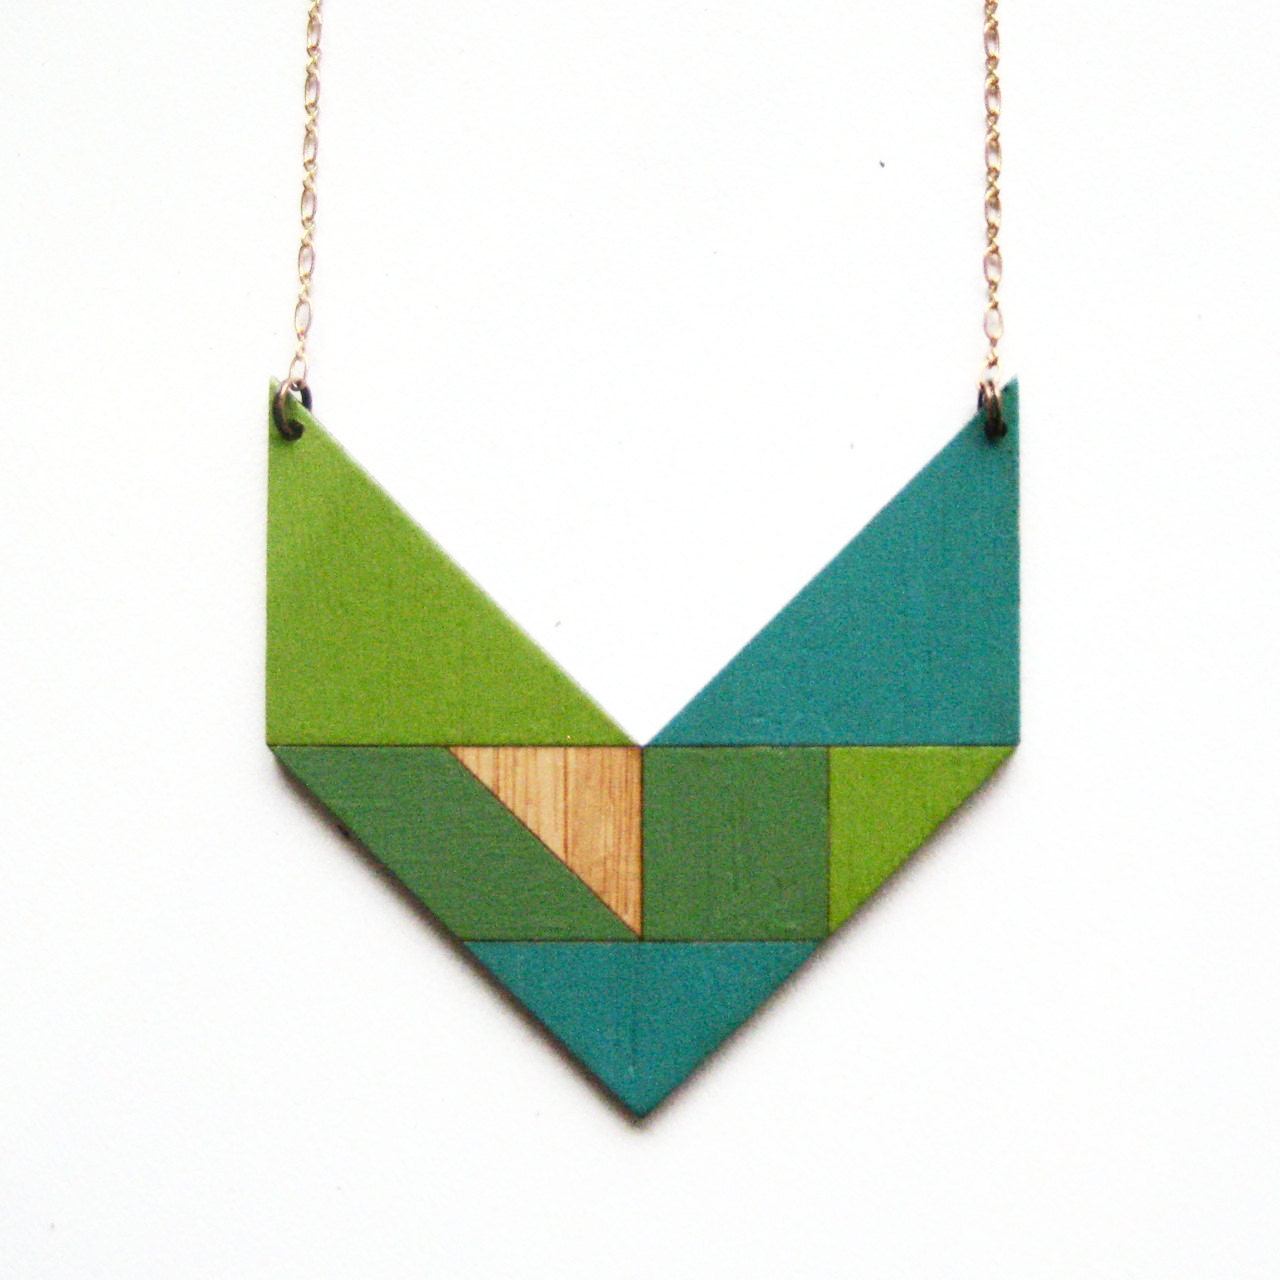 Tangram necklace / V / turquoise & grass green